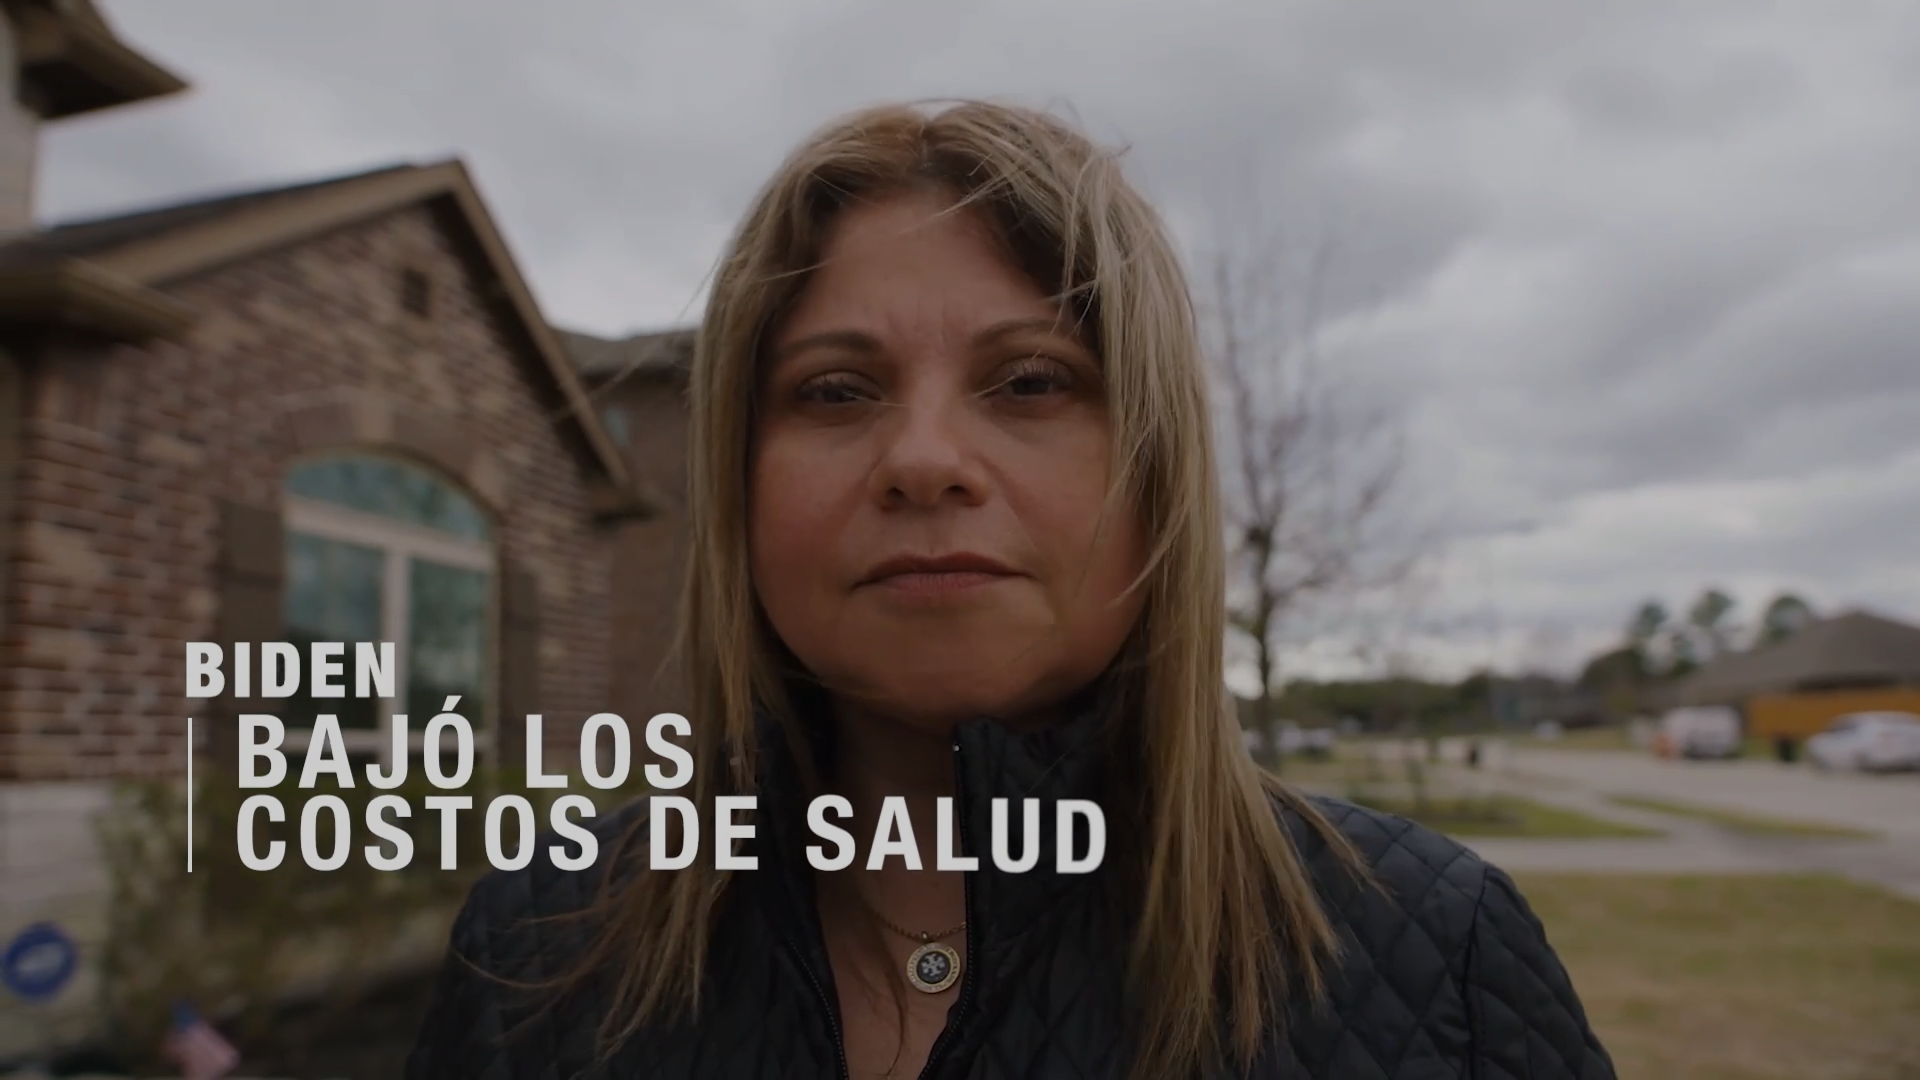 A medium close-up portrait of a woman looking at camera standing outside of a house, and text on screen that reads "Biden bajó los costos de salud"